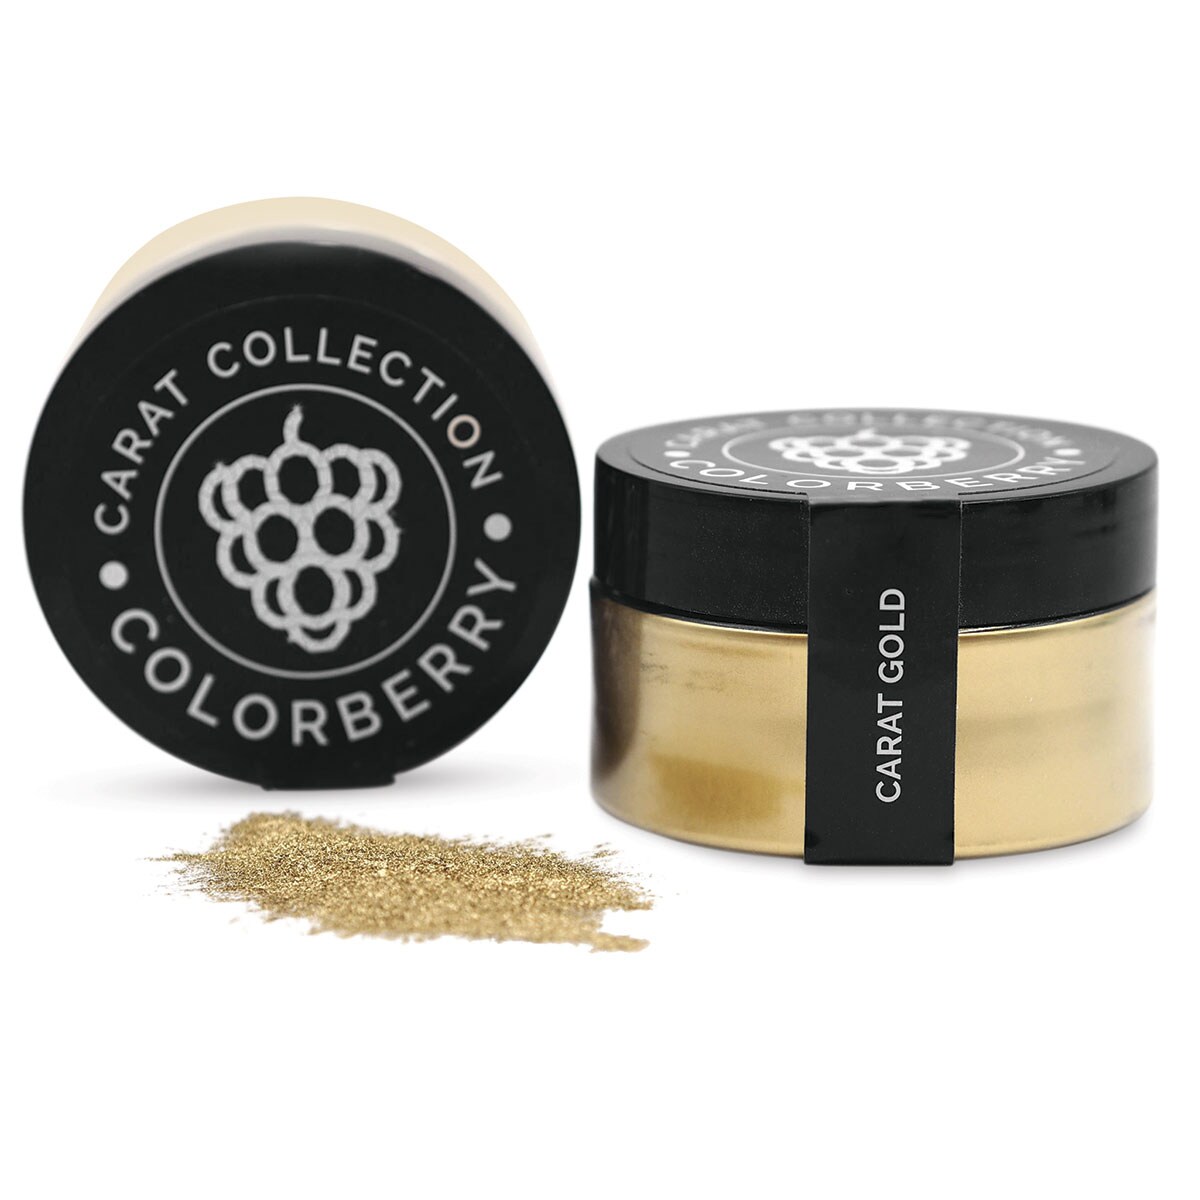 Colorberry Carat Collection Dry Resin Pigment - Gold, 50 g, Jar